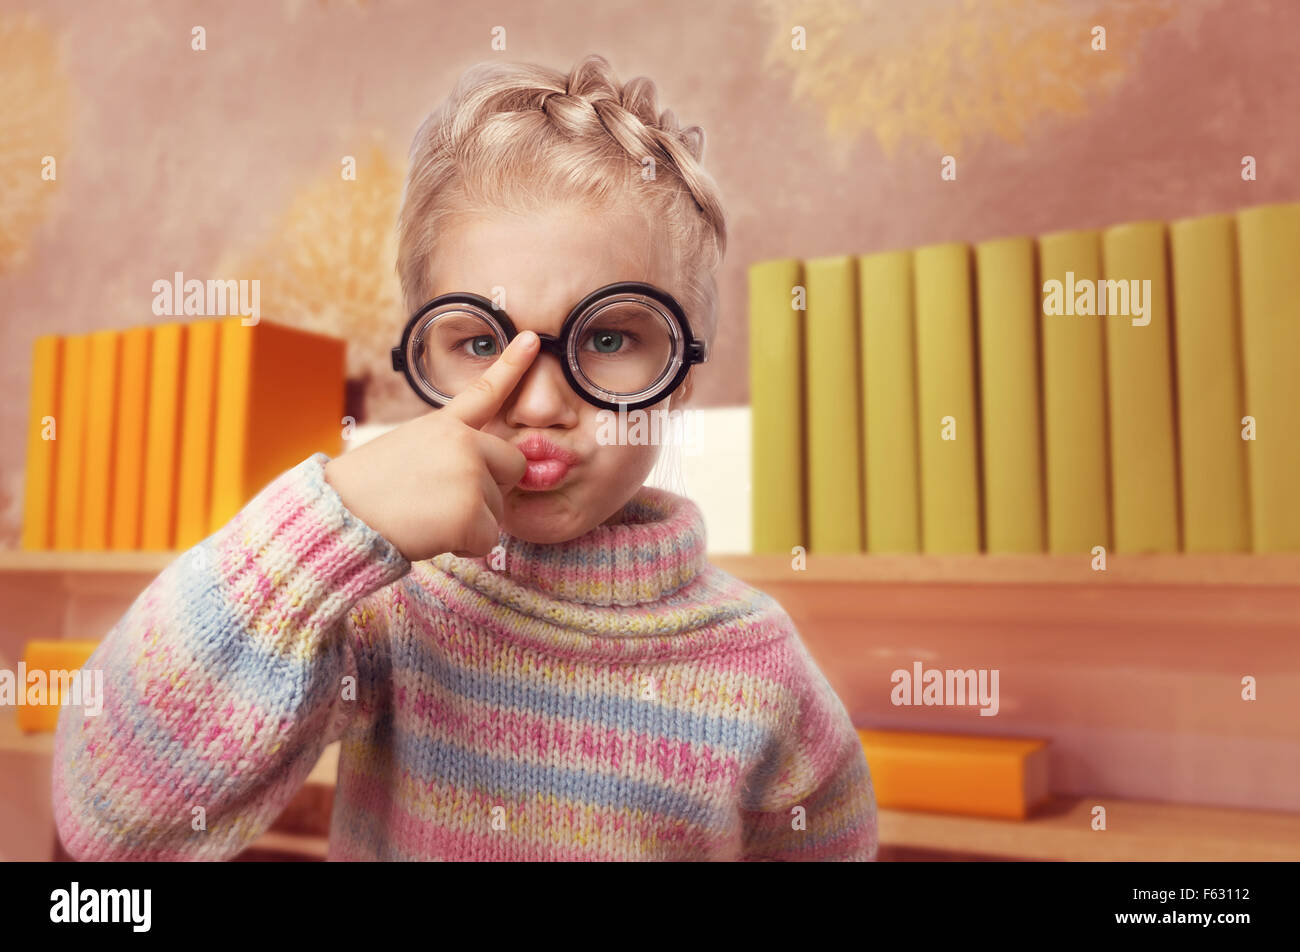 Little egghead girl in glasses makes faces in home interior Stock Photo